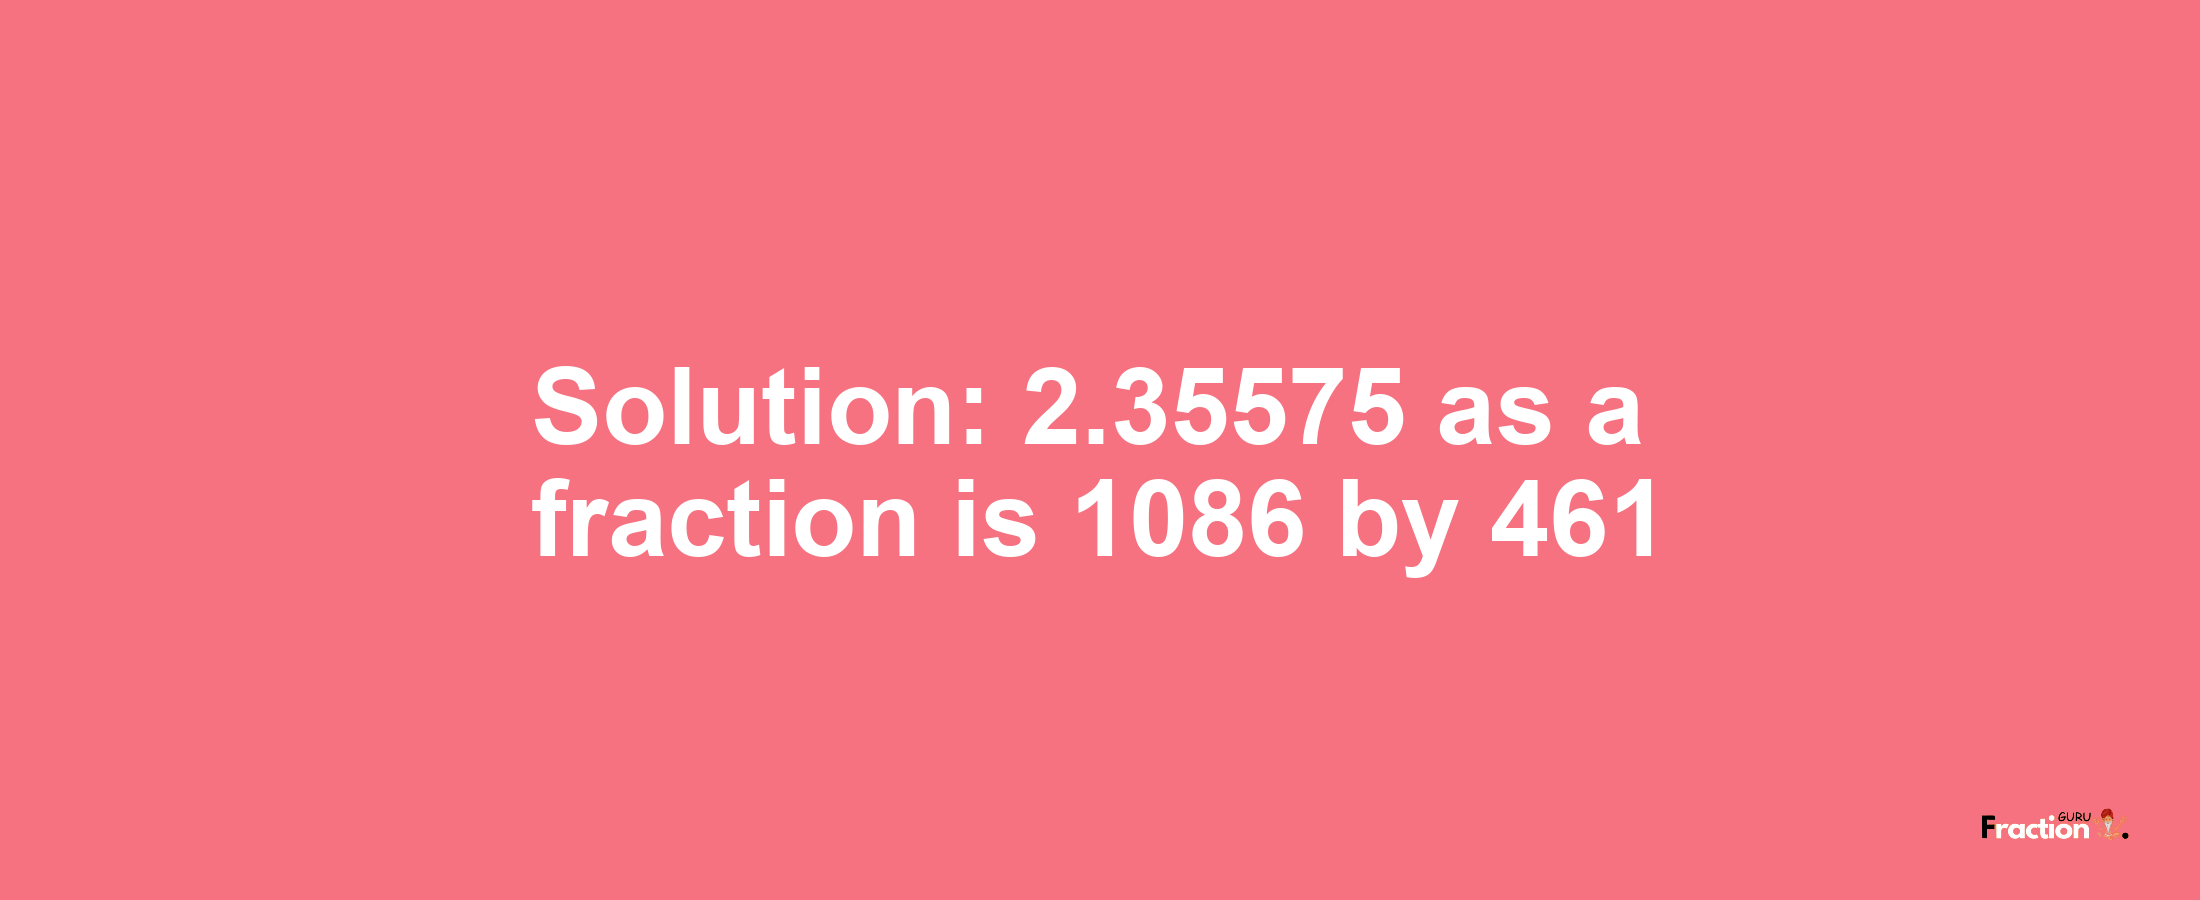 Solution:2.35575 as a fraction is 1086/461